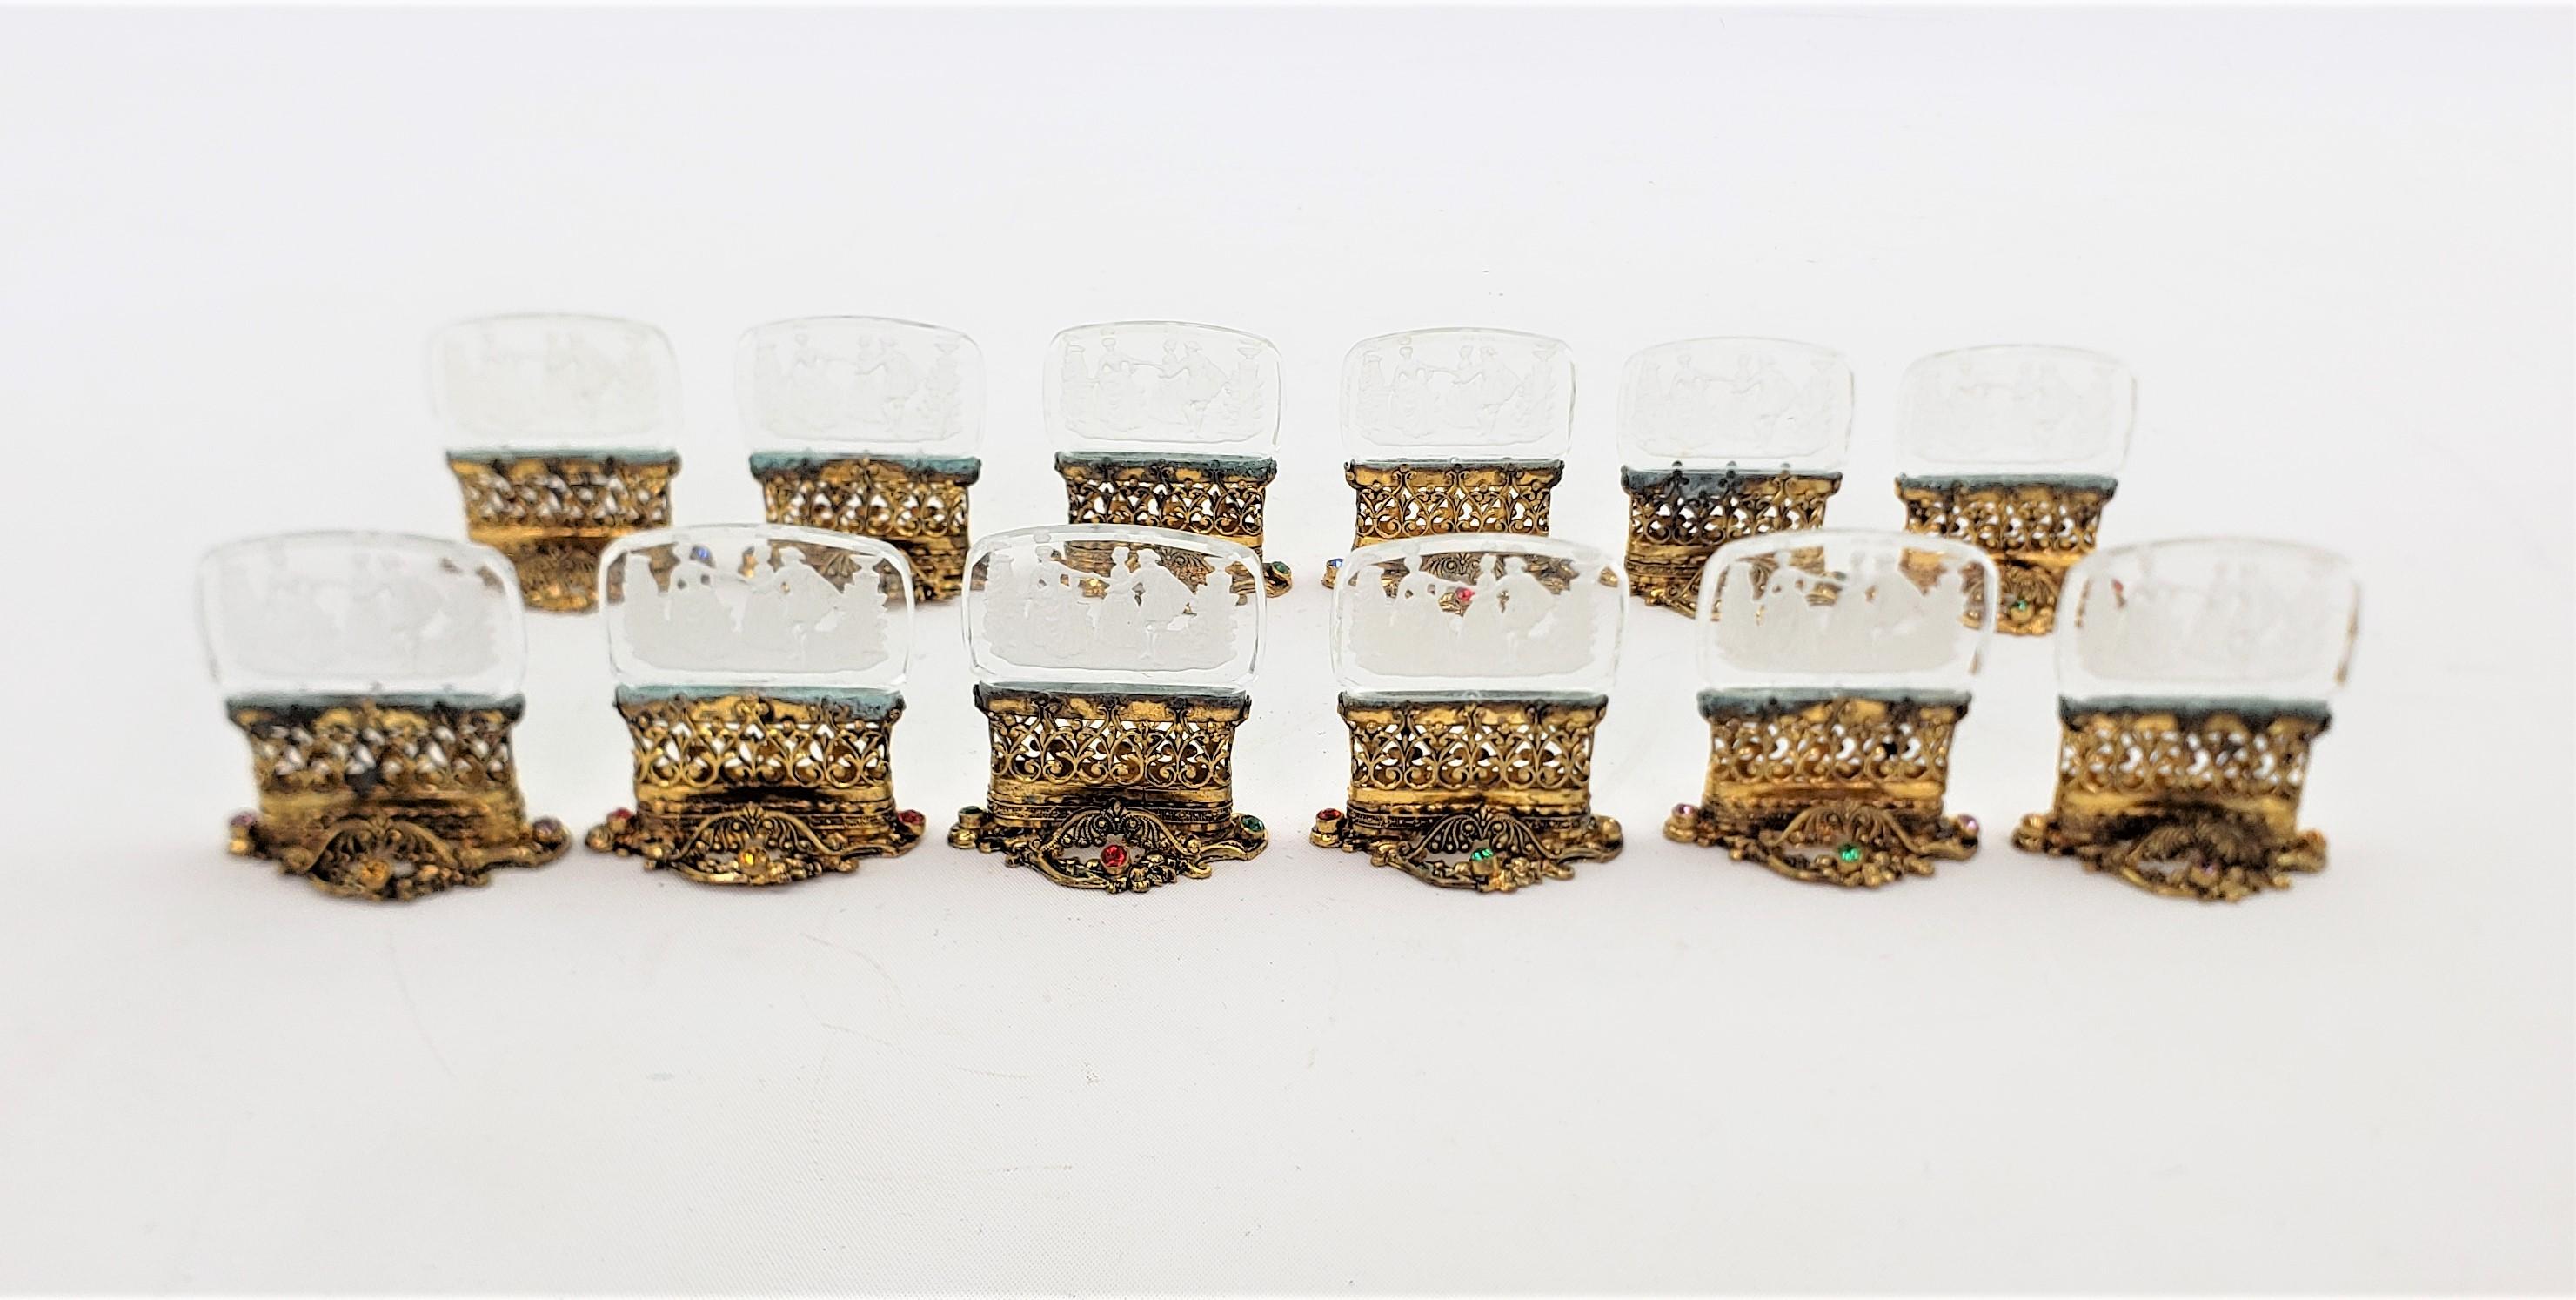 These antique place card or menu holders show no maker's mark, but are presumed to have originated from the Czech Republic and date to approximately 1920 and done in a Renaissance Revival style. The holders are done in a cast white metal with